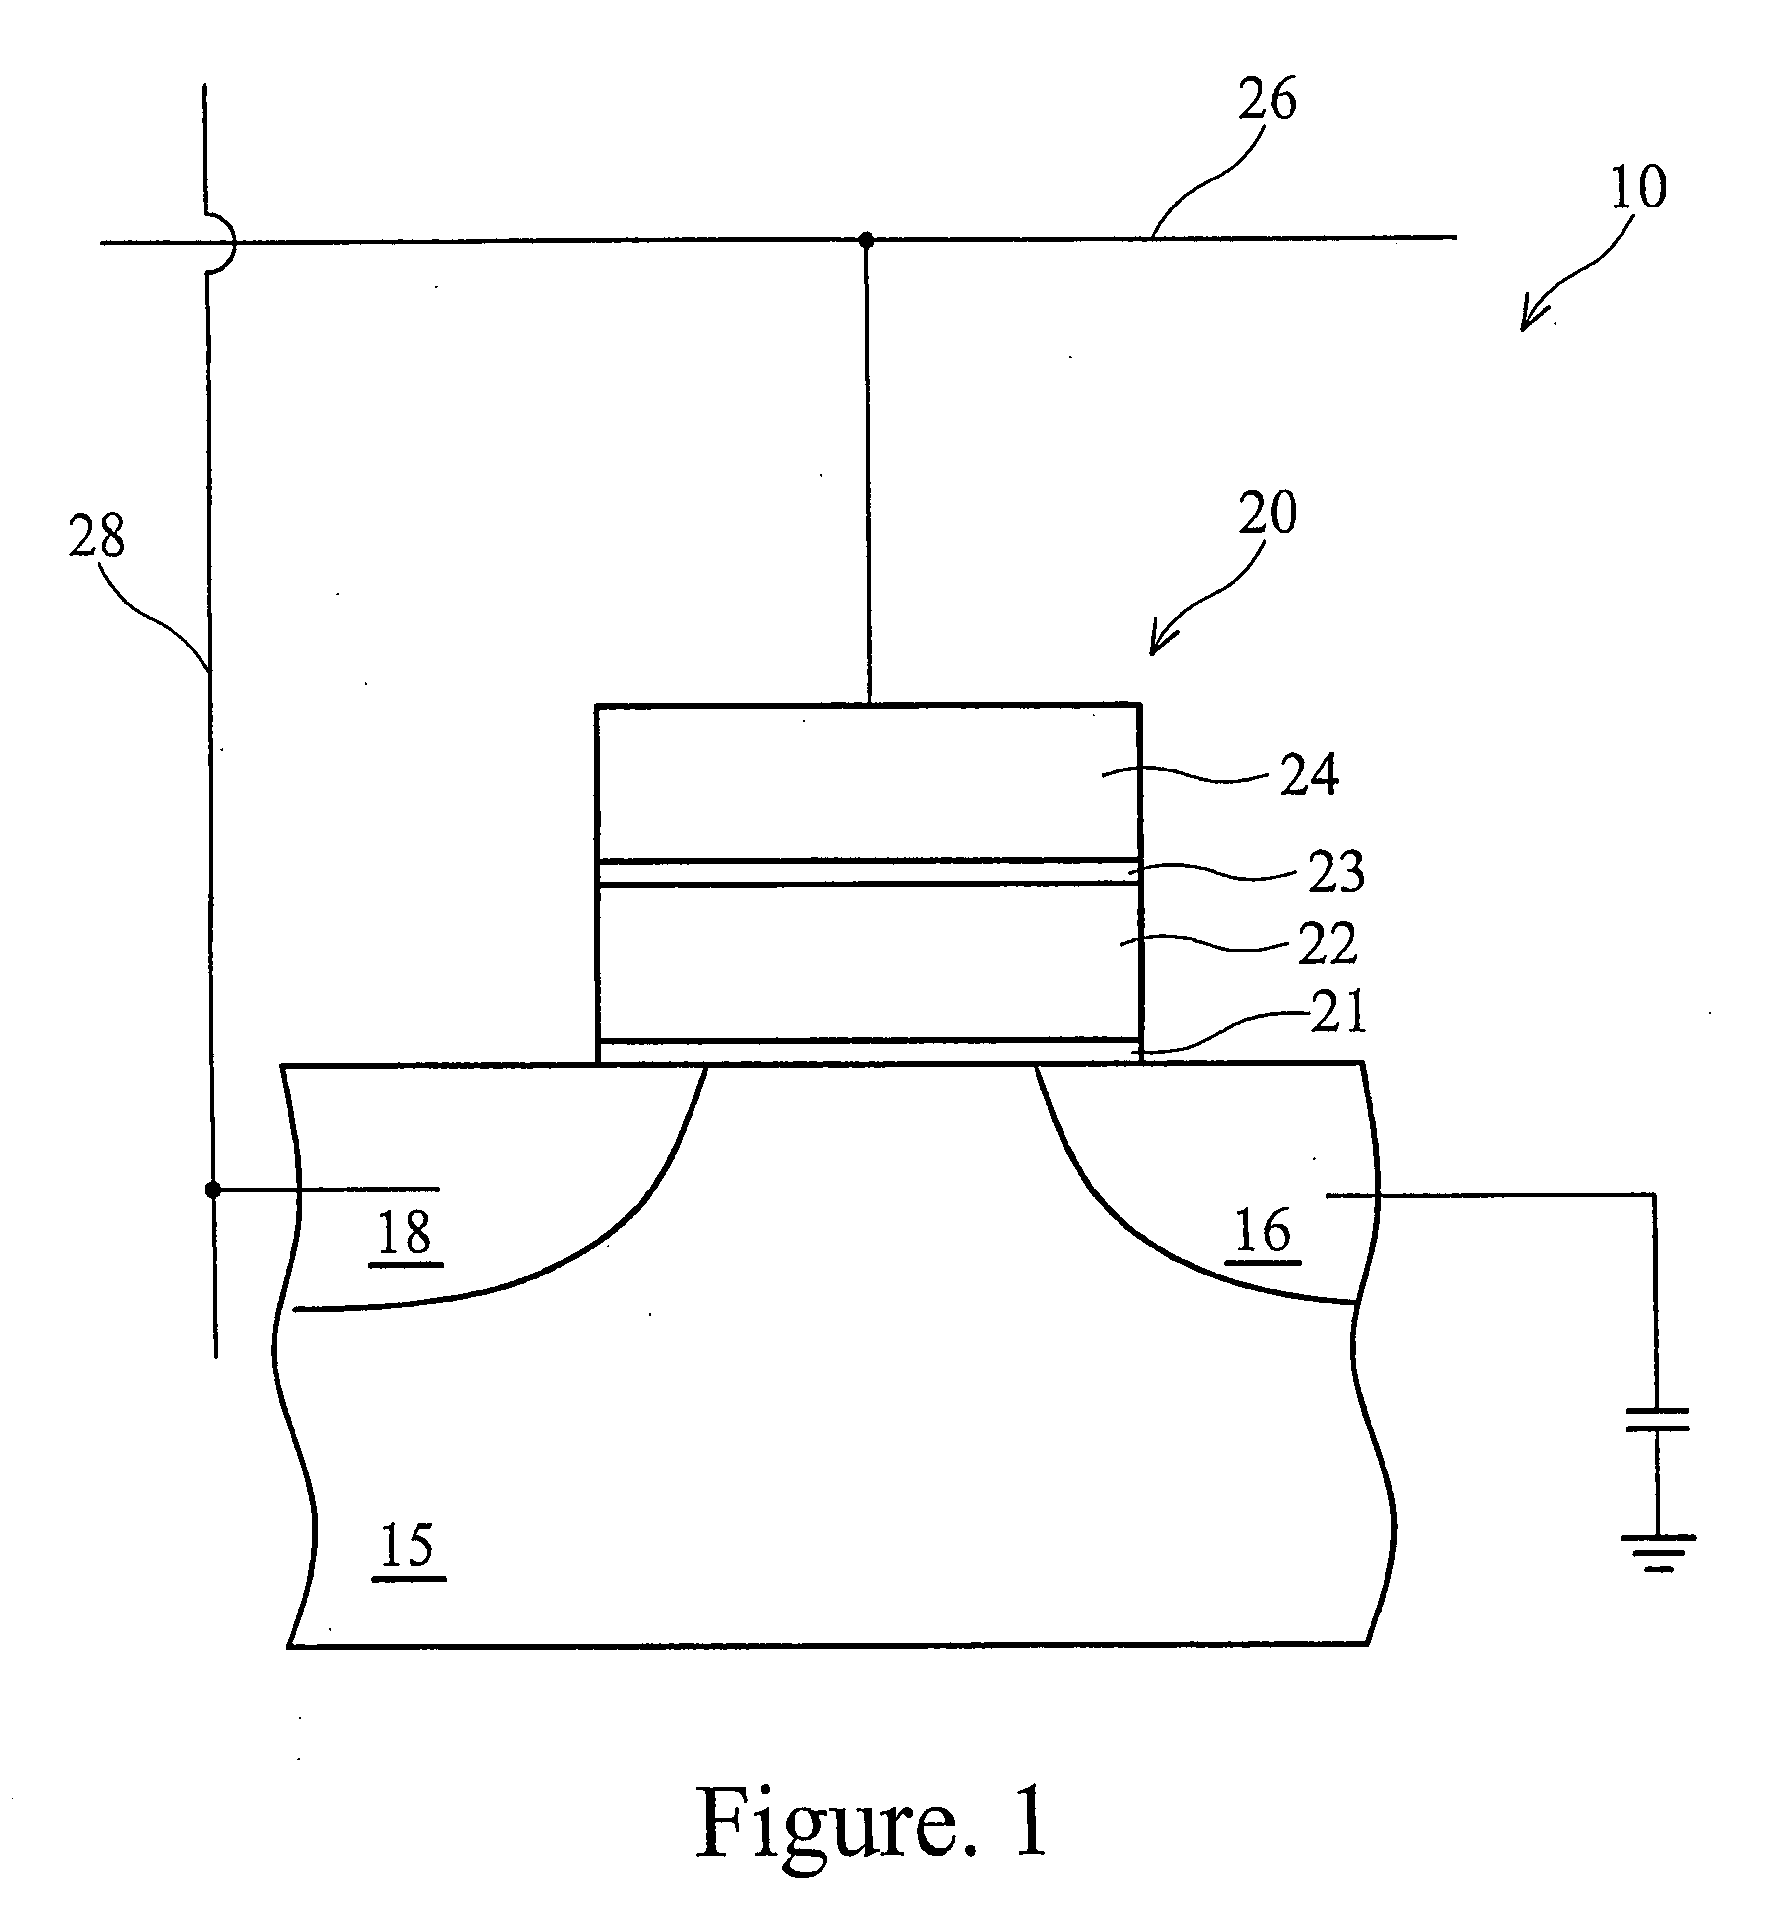 Gated semiconductor device and method of fabricating same